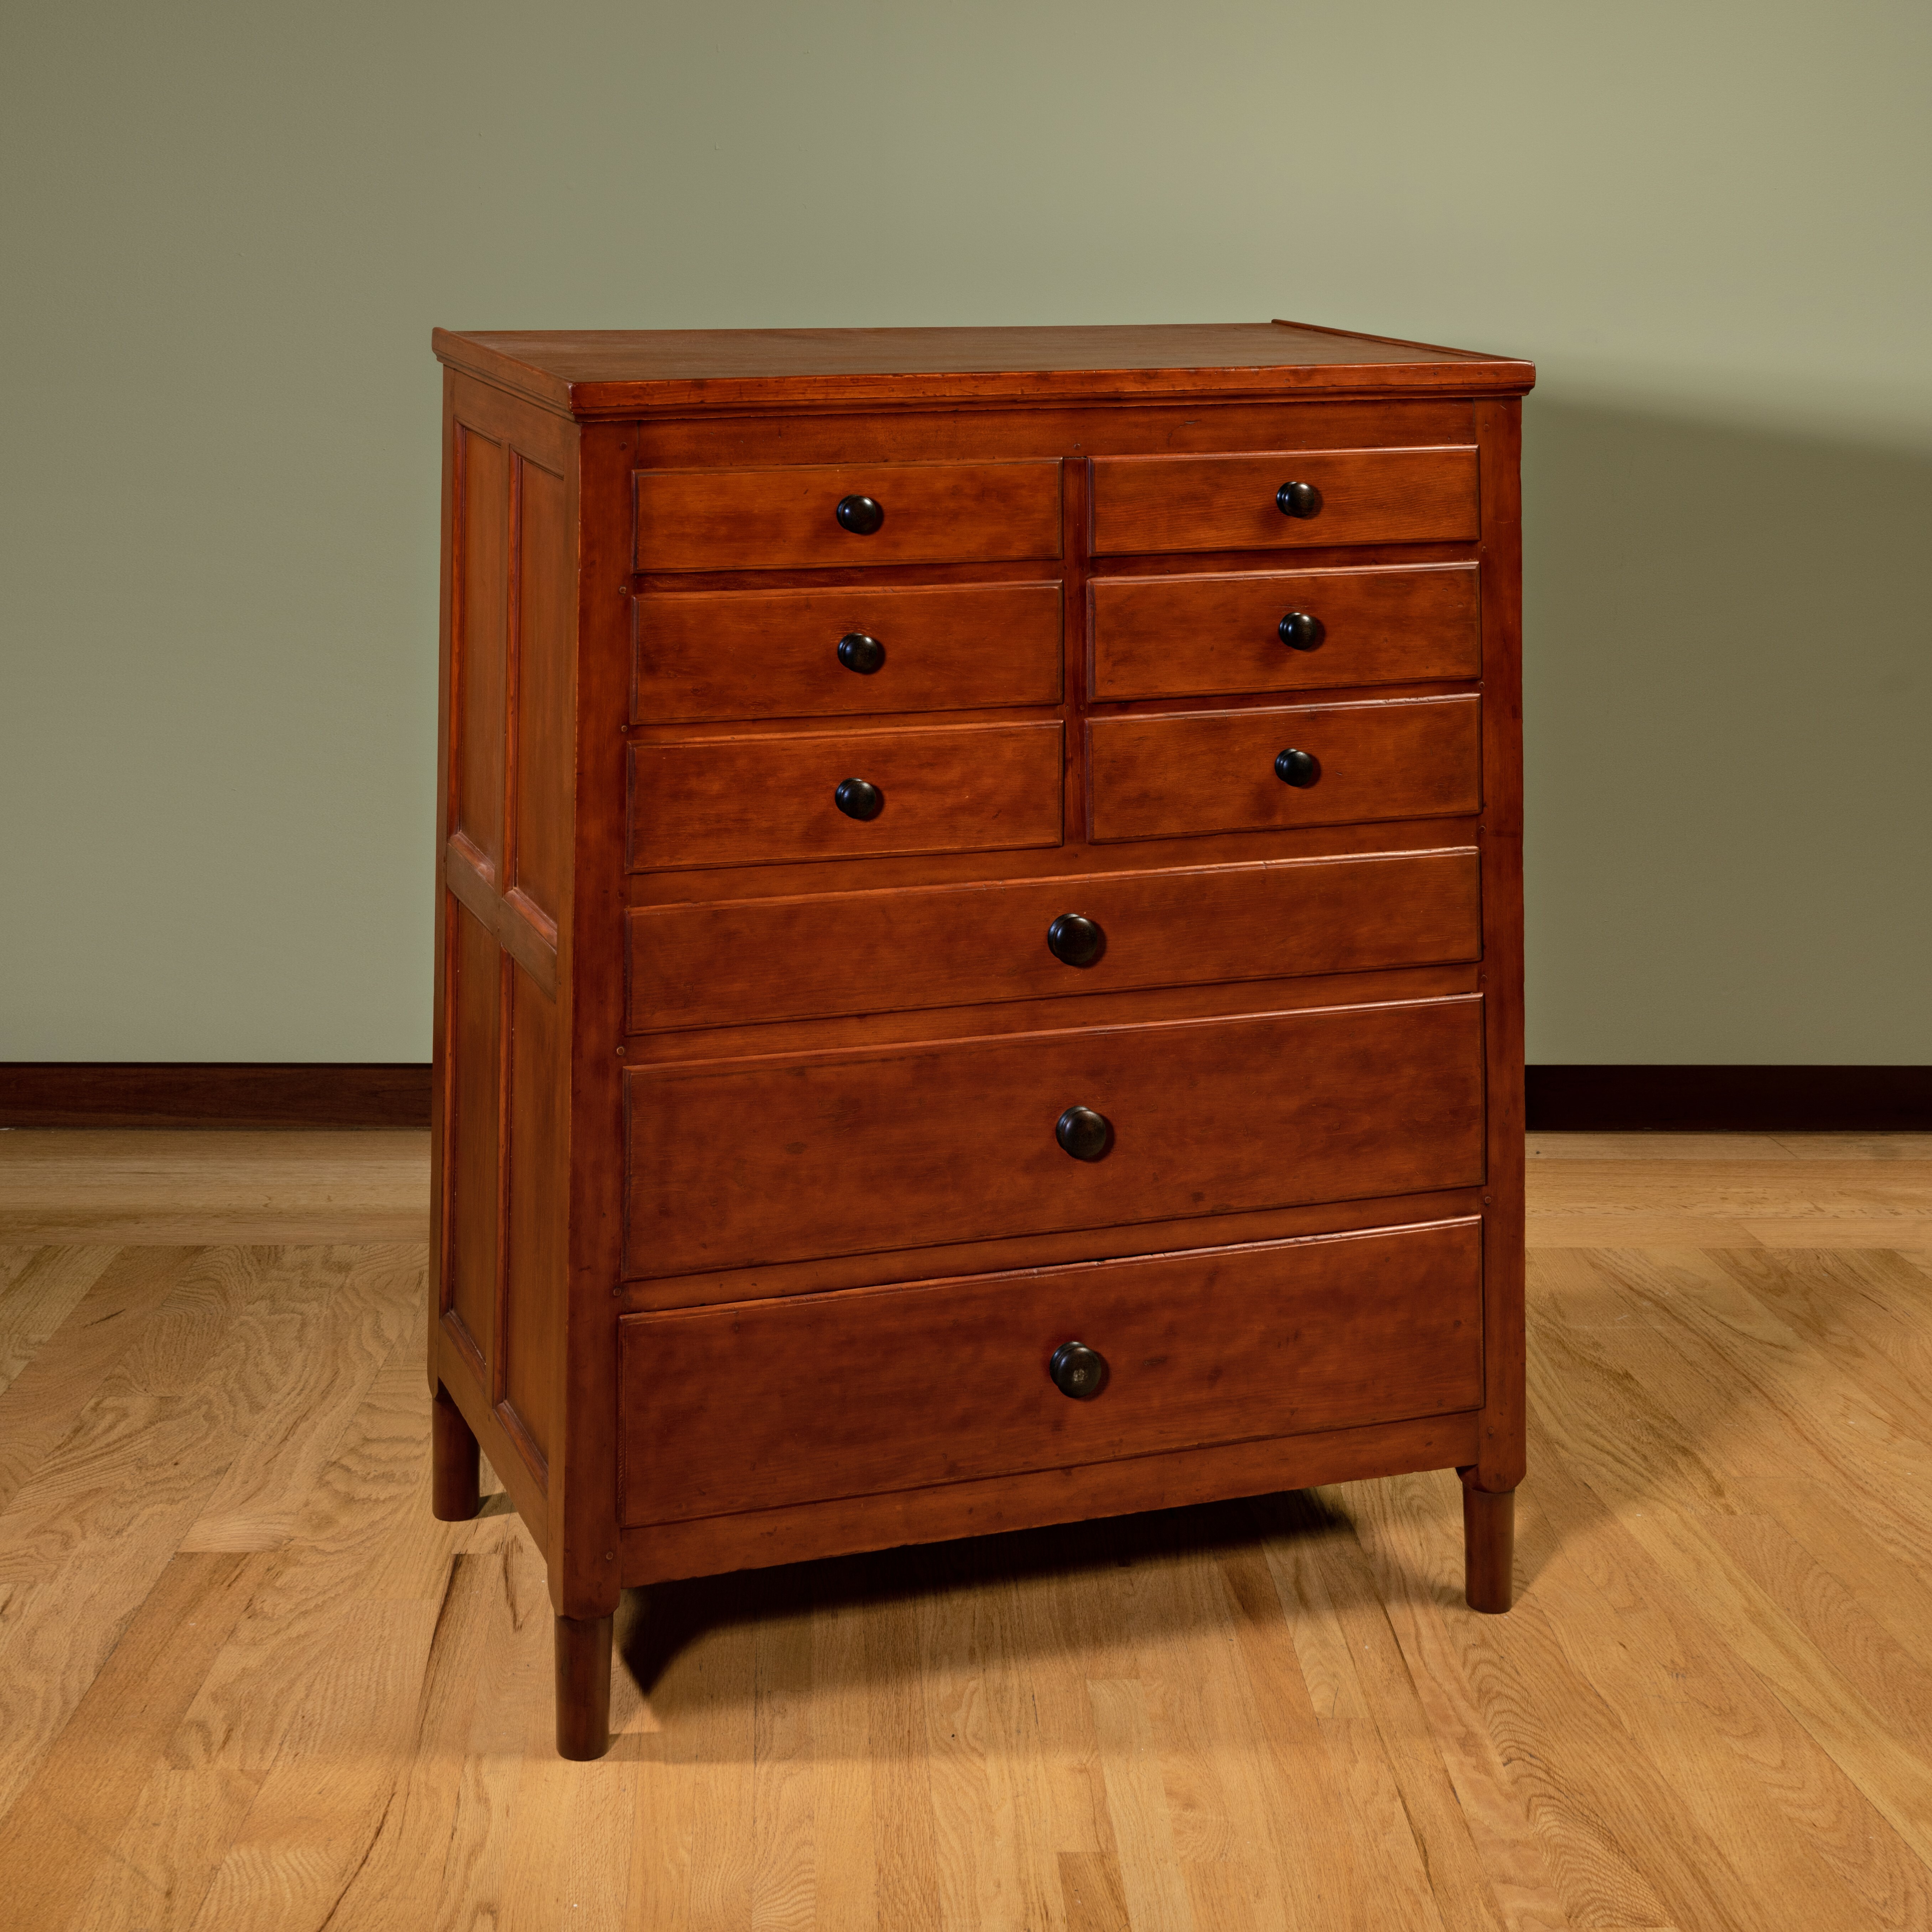 Enfield, NH Shaker Village Chest Of Drawers Pine, hardwood, iron, paint 53 1/2 × 42 3/4 × 25 in. (135.9 × 108.6 × 63.5 cm) Enfield Shaker Museum, 1993.3.147 L.2023.10.3T